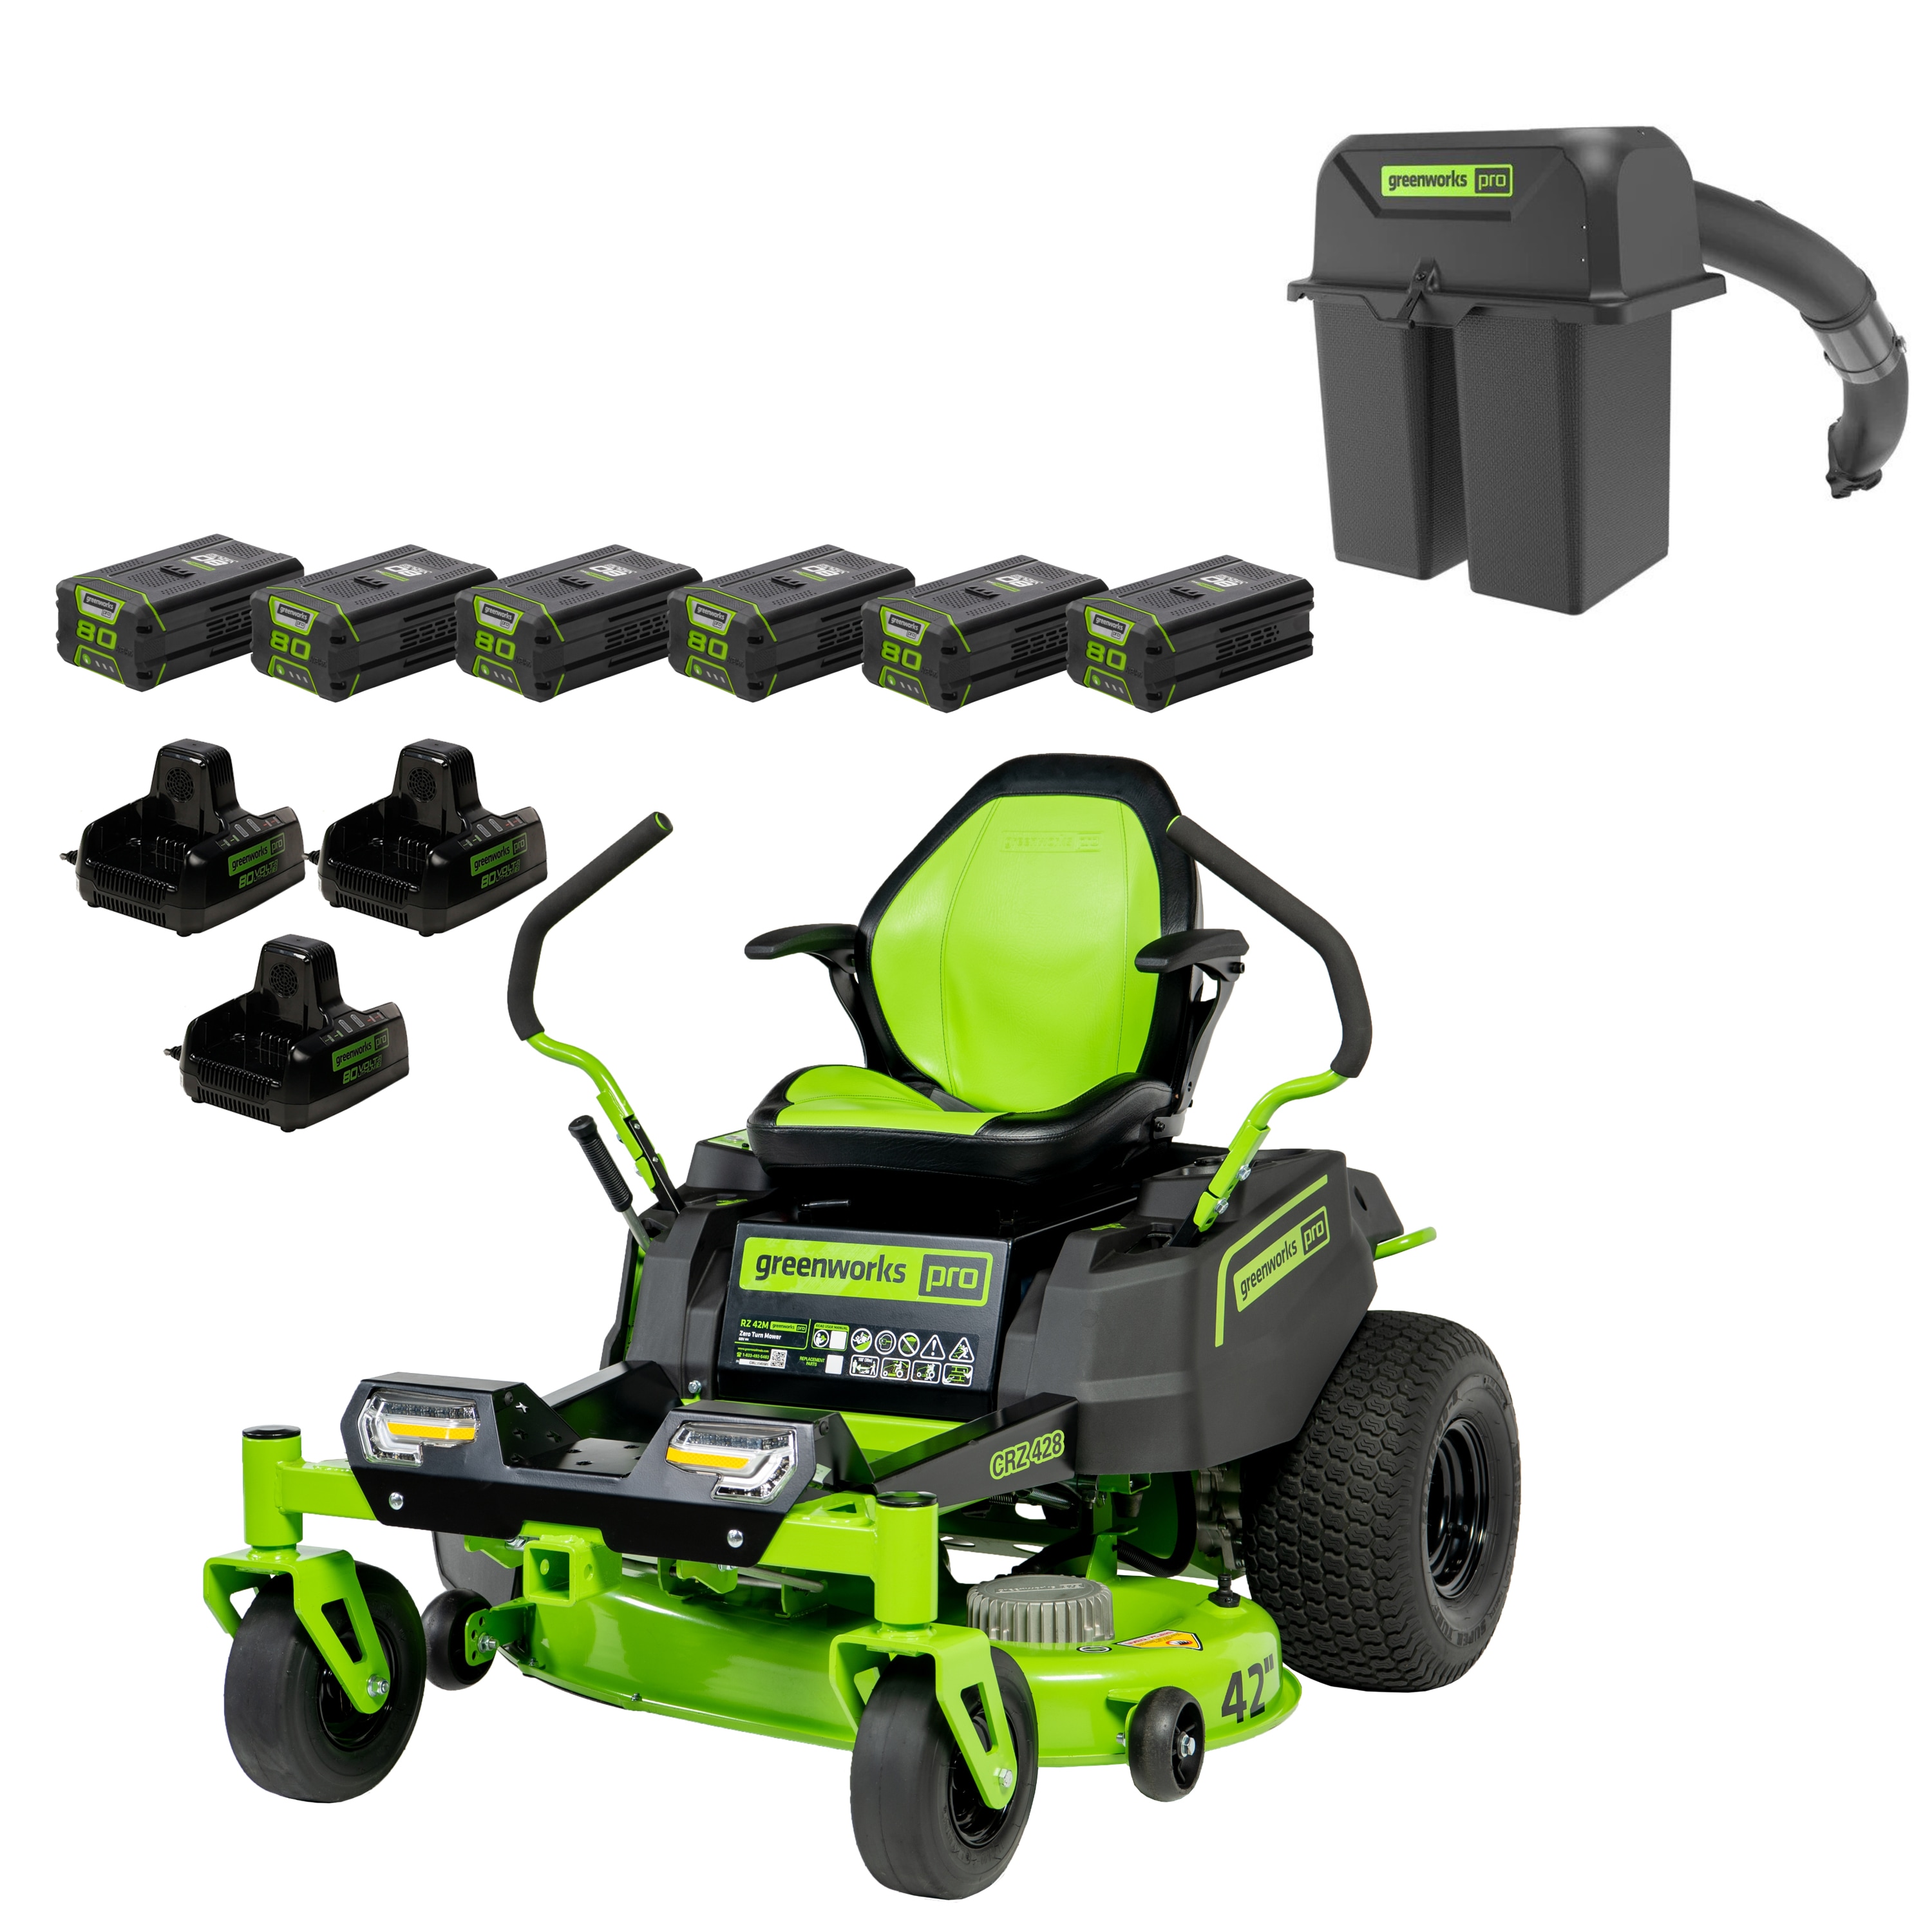 Greenworks Pro Crossover Zero Turn 42-in Lithium Ion Electric Riding Lawn Mower and Bagger Combo Kit